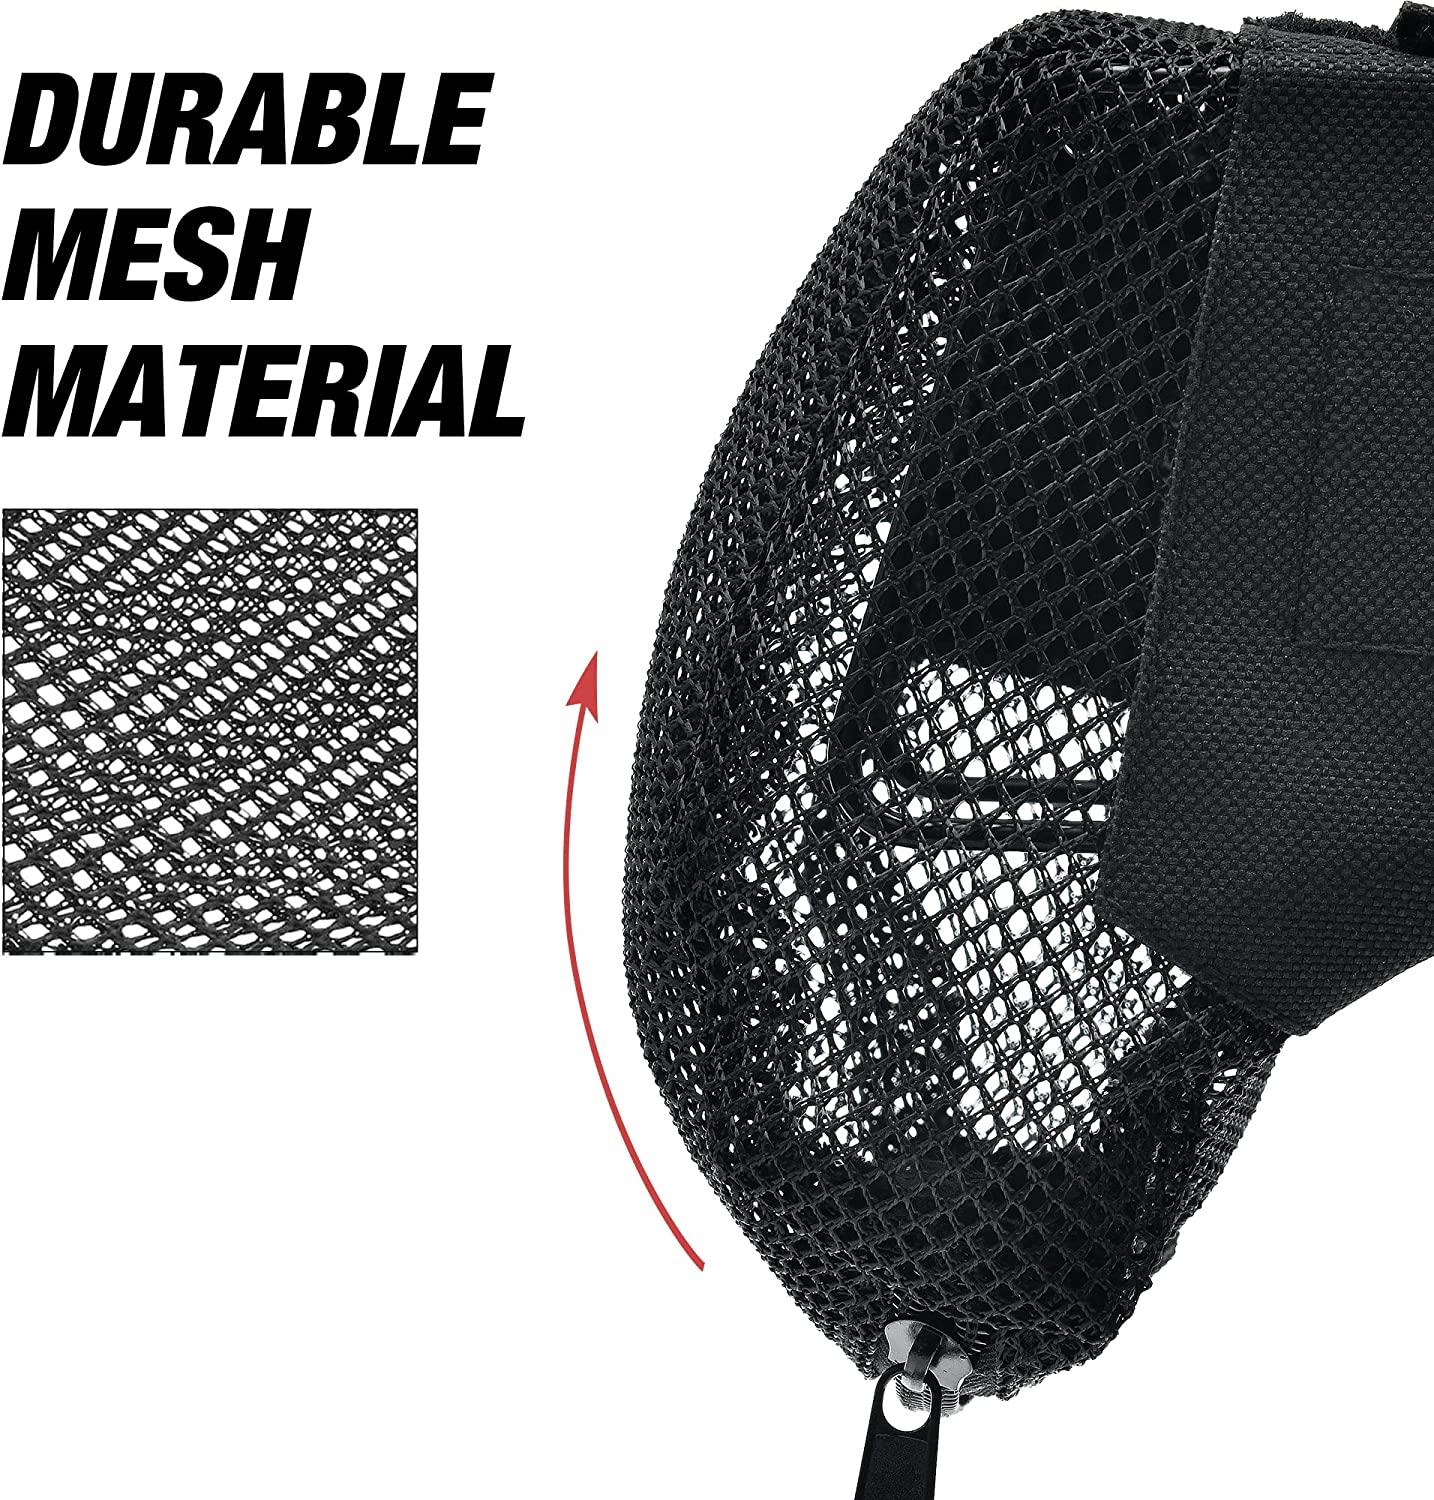  Ideagle Brass Catcher, Heat Resistant Mesh Catcher for Rifle  Range, with Pic Rail Mount : Sports & Outdoors